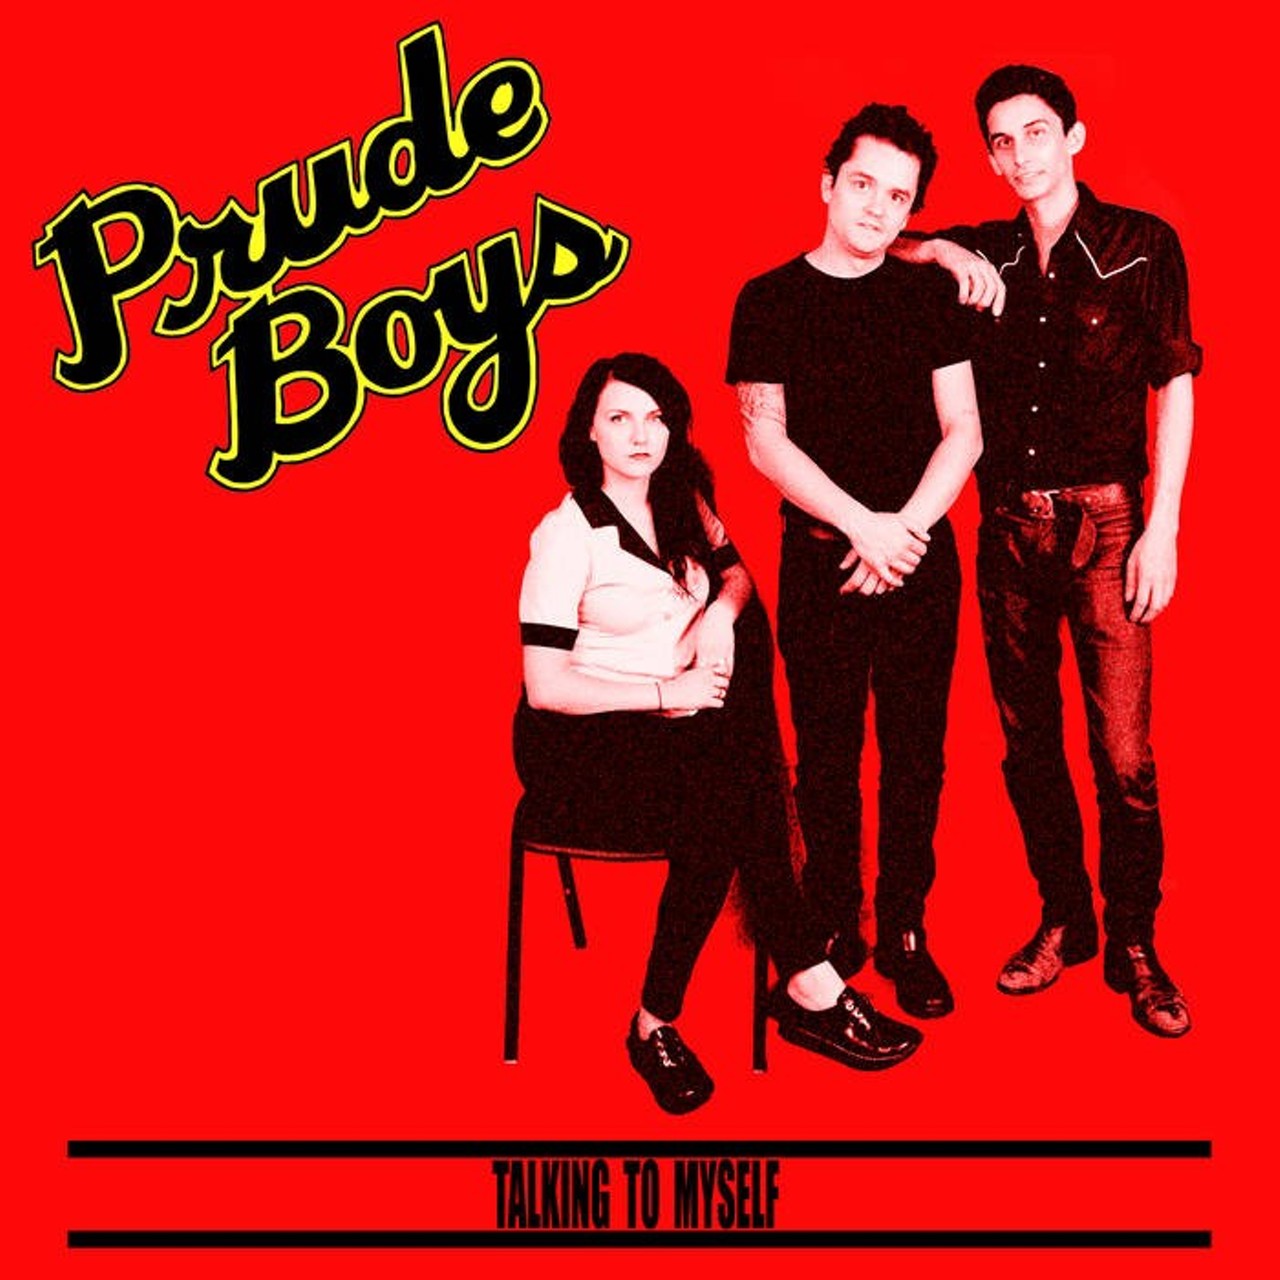 3. Prude Boys | The Outlaw EP, Talking to Myself EP
Garage pop threesome Prude Boys' The Outlaw EP was a zombie beach party meets a Tarantino-lite dreamworld. A few months after dropping it, the band &#151; Caroline Myrick, Quennton Thornbury, and Connor Dodson &#151; released the Talking to Myself EP which feels like a malaise-y water ballon fight framing Myrick's unique warble. All in all, the two worlds Prude Boys explored this year are worthy of frequent visits.